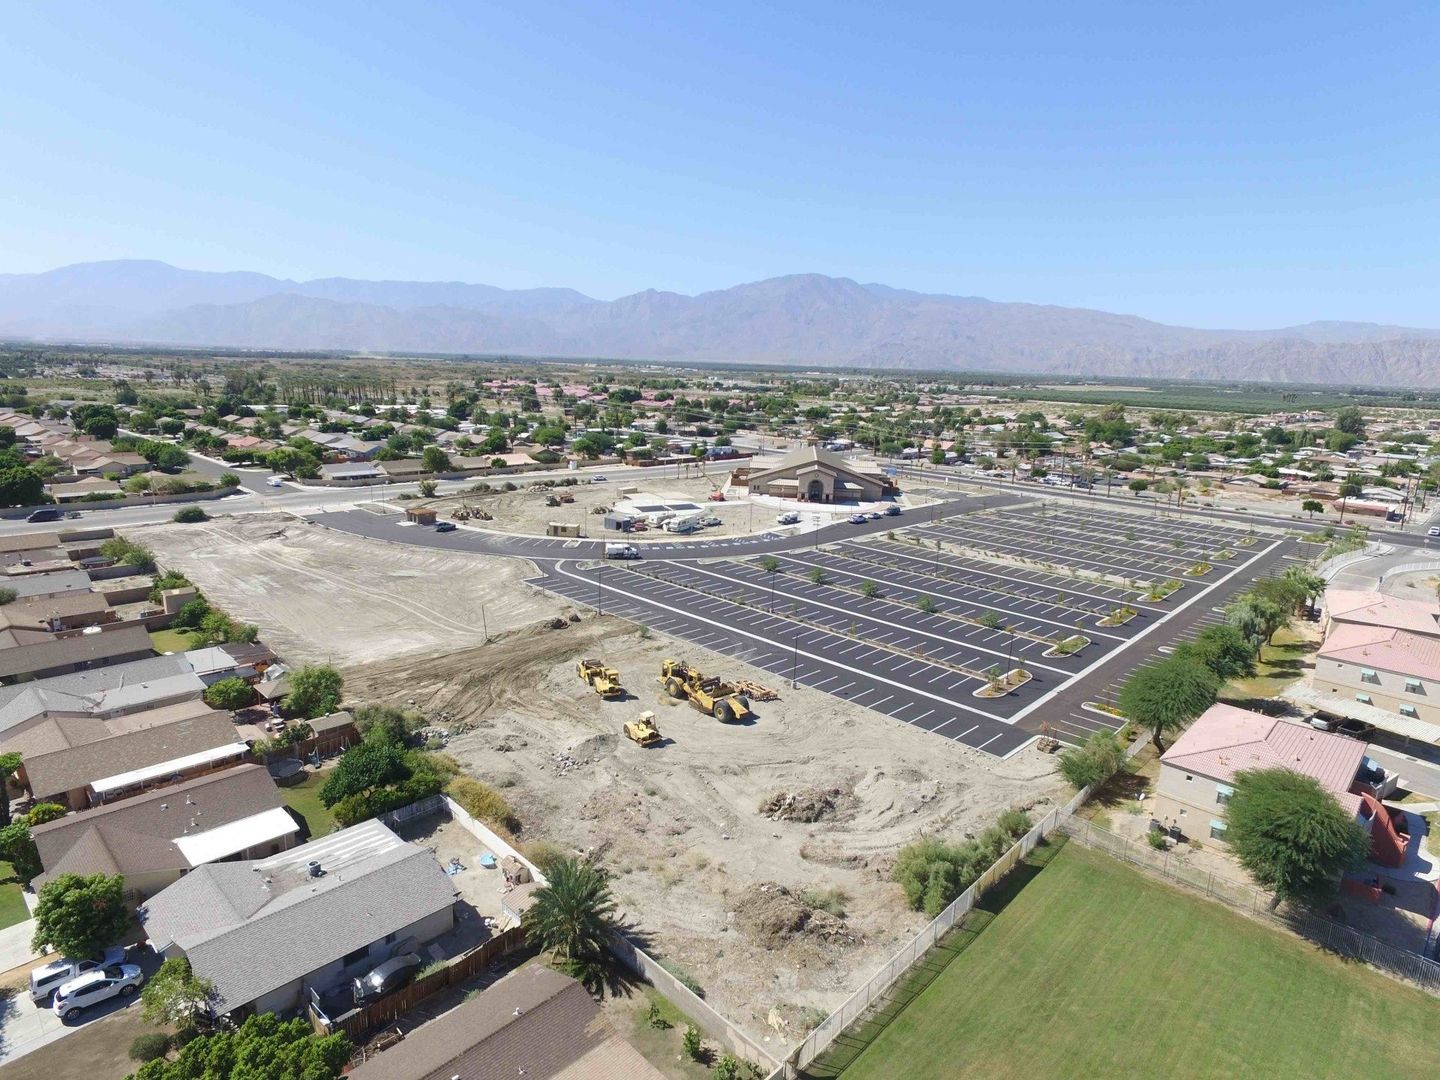 Mckeever Civil Engineering's  aerial view of a completed project of a parking lot in a residential area with mountains in the background .